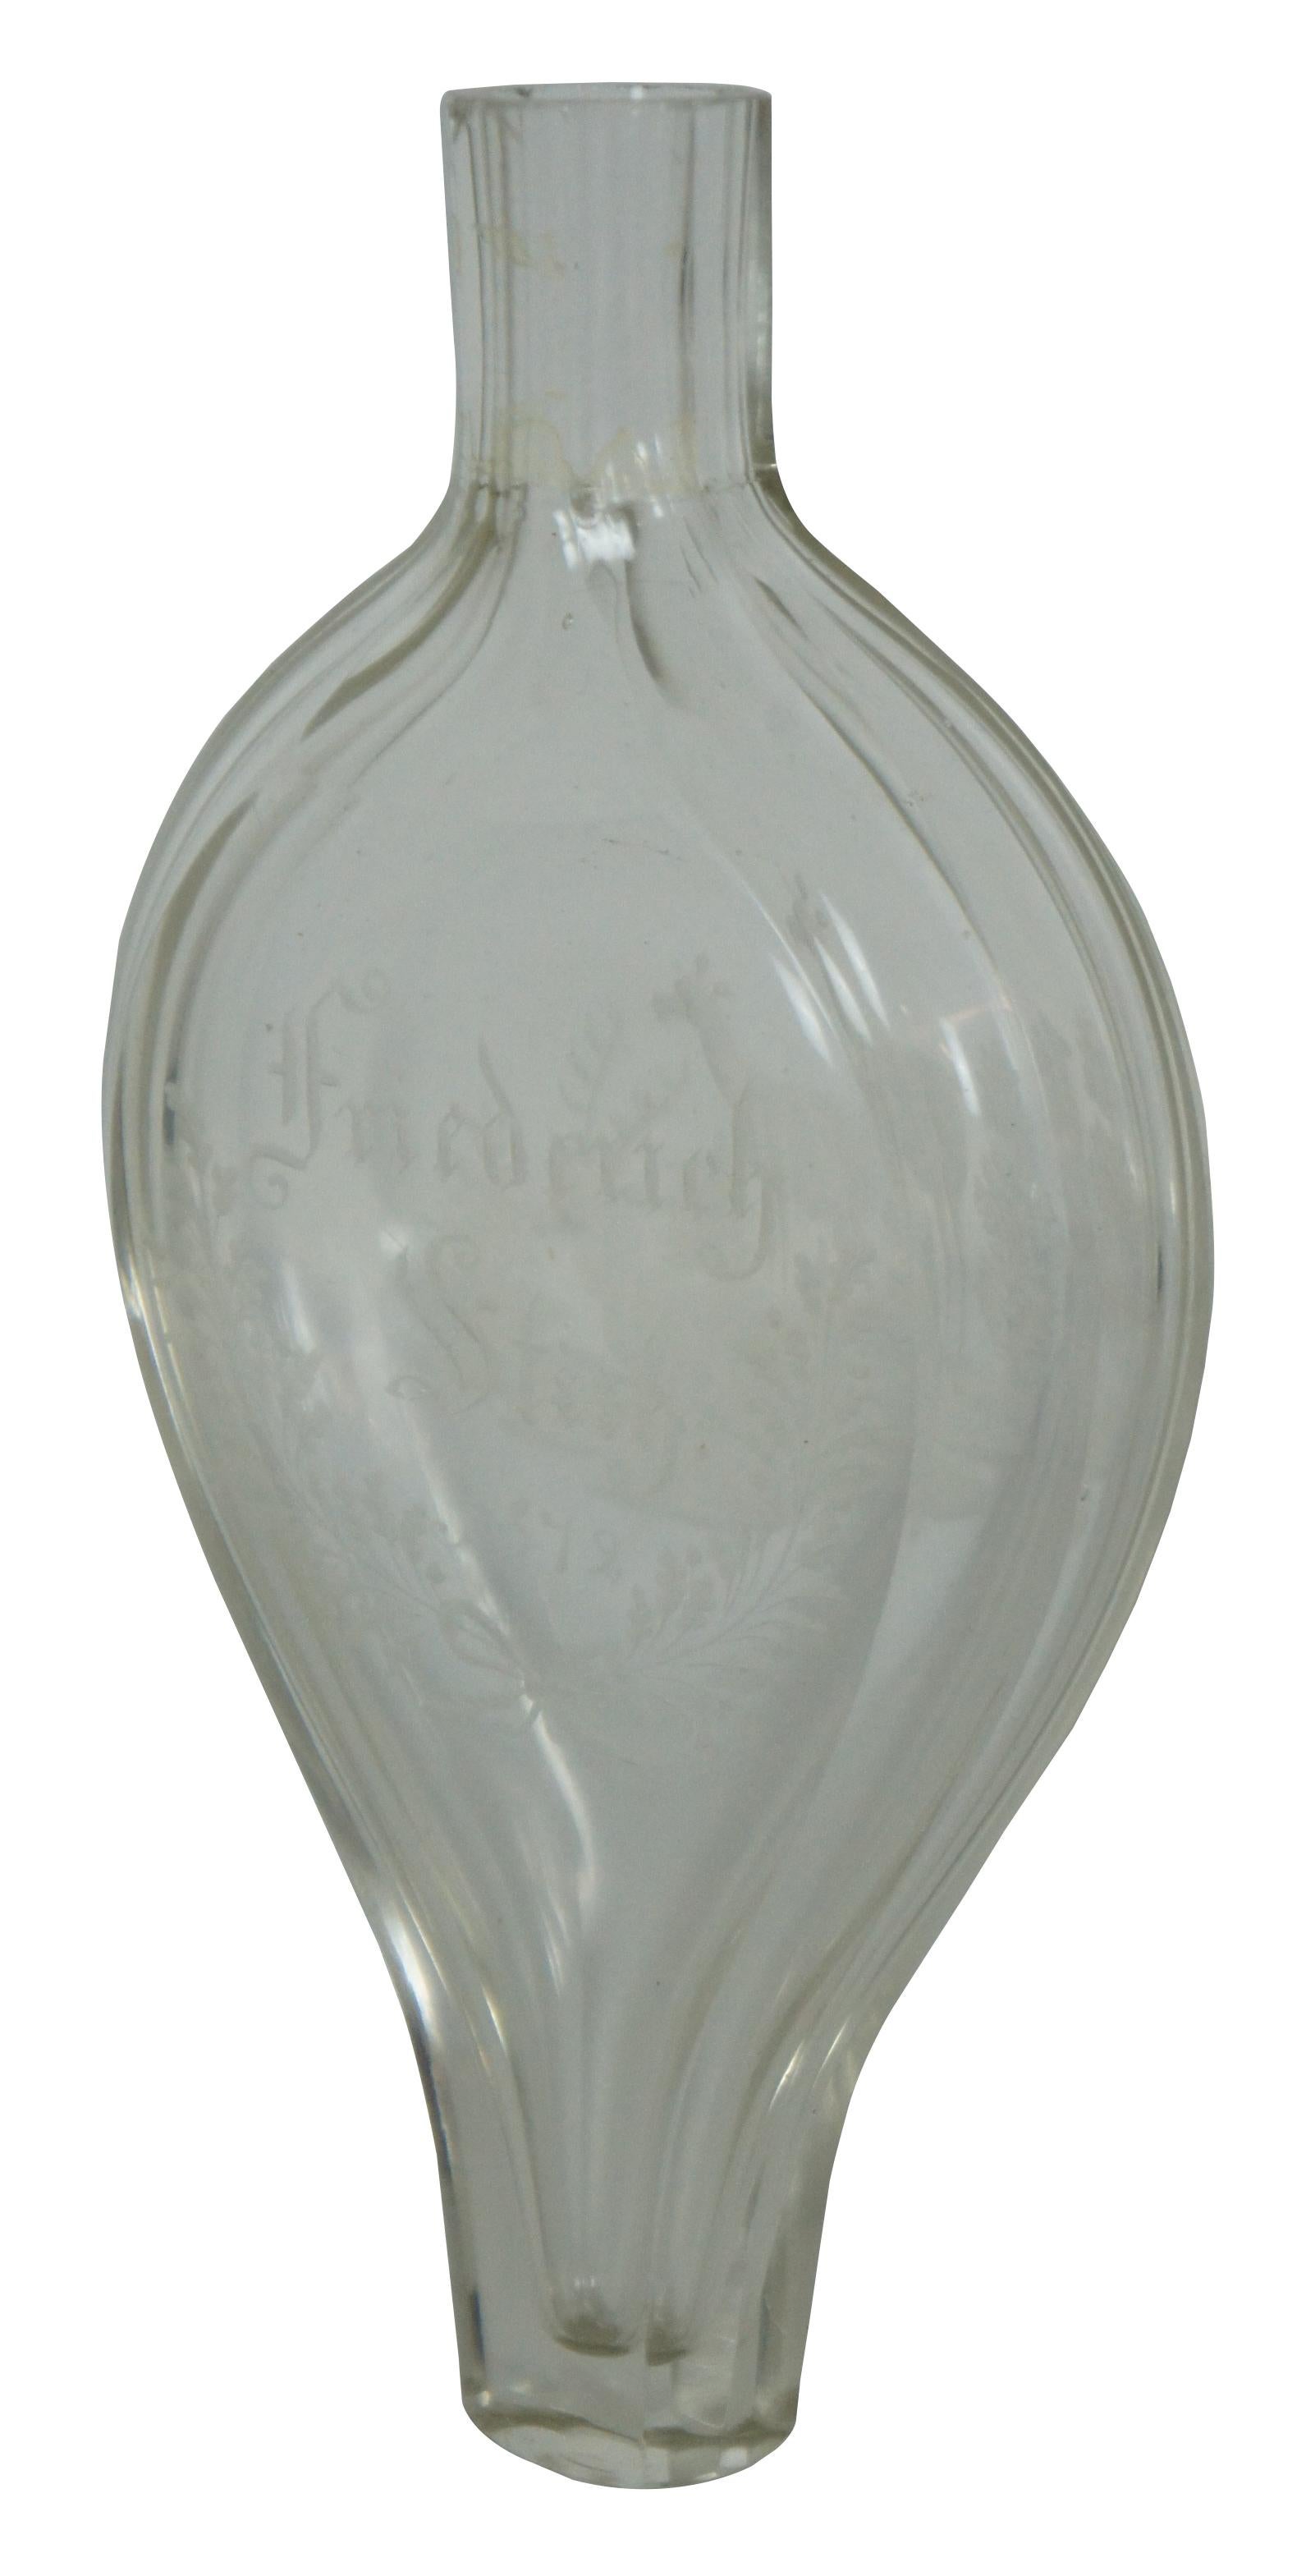 Rare antique late 19th century German etched glass perfume bottle / apothecary decanter or bud vase featuring unusual teardrop form with a narrow octagonal base and top. Eetched on one side with the words Friederich Stioh 1872 above a pair of oak